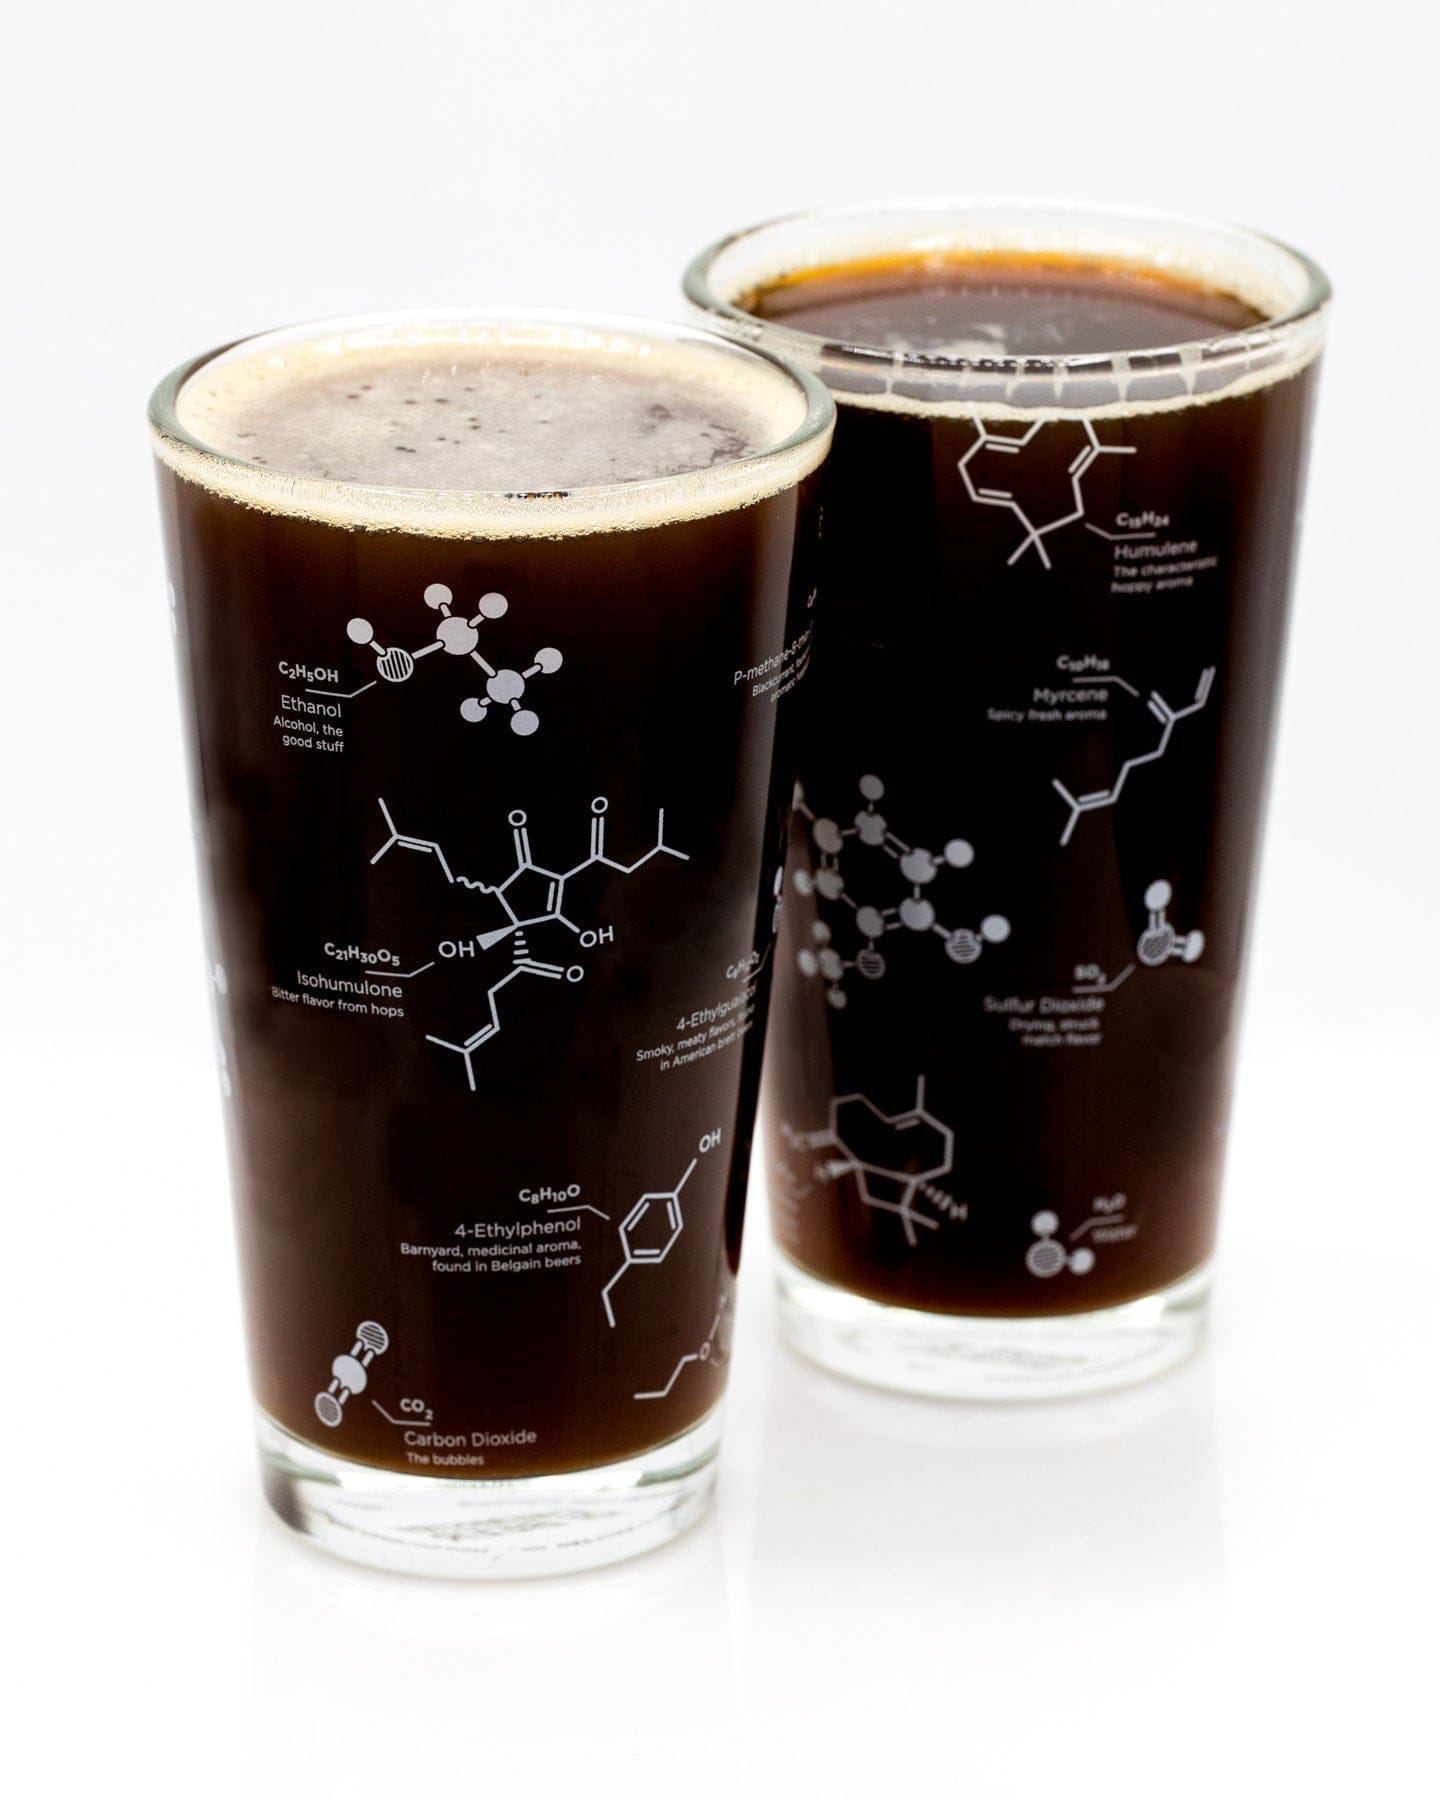 Great Beards of Science Beer Glass | Cognitive Surplus Pack of 4